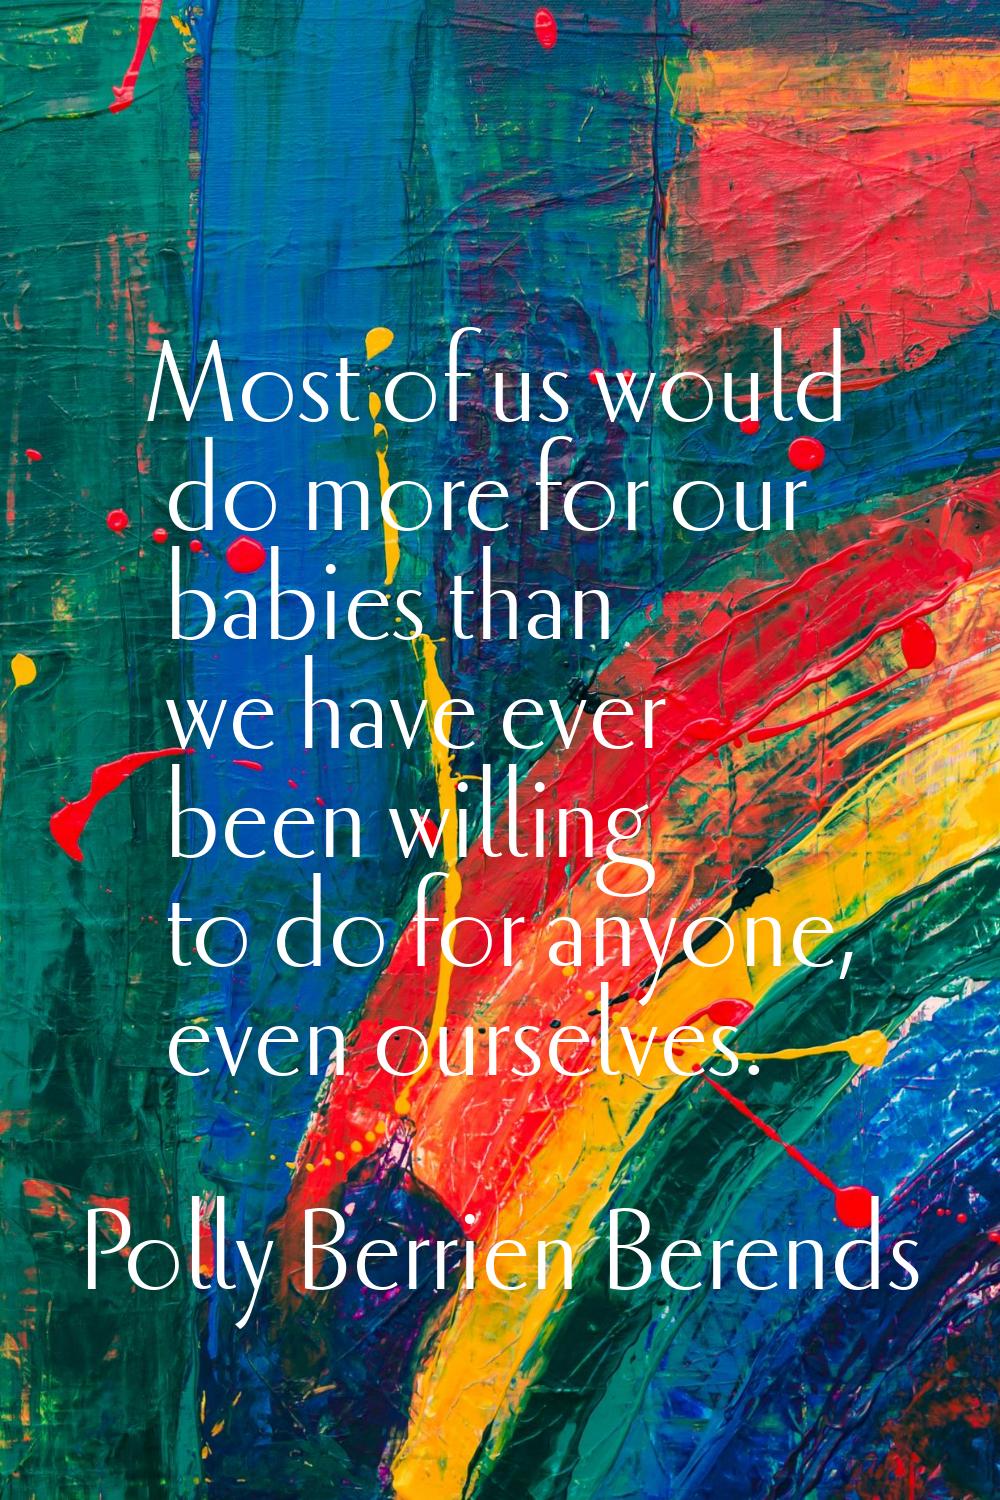 Most of us would do more for our babies than we have ever been willing to do for anyone, even ourse